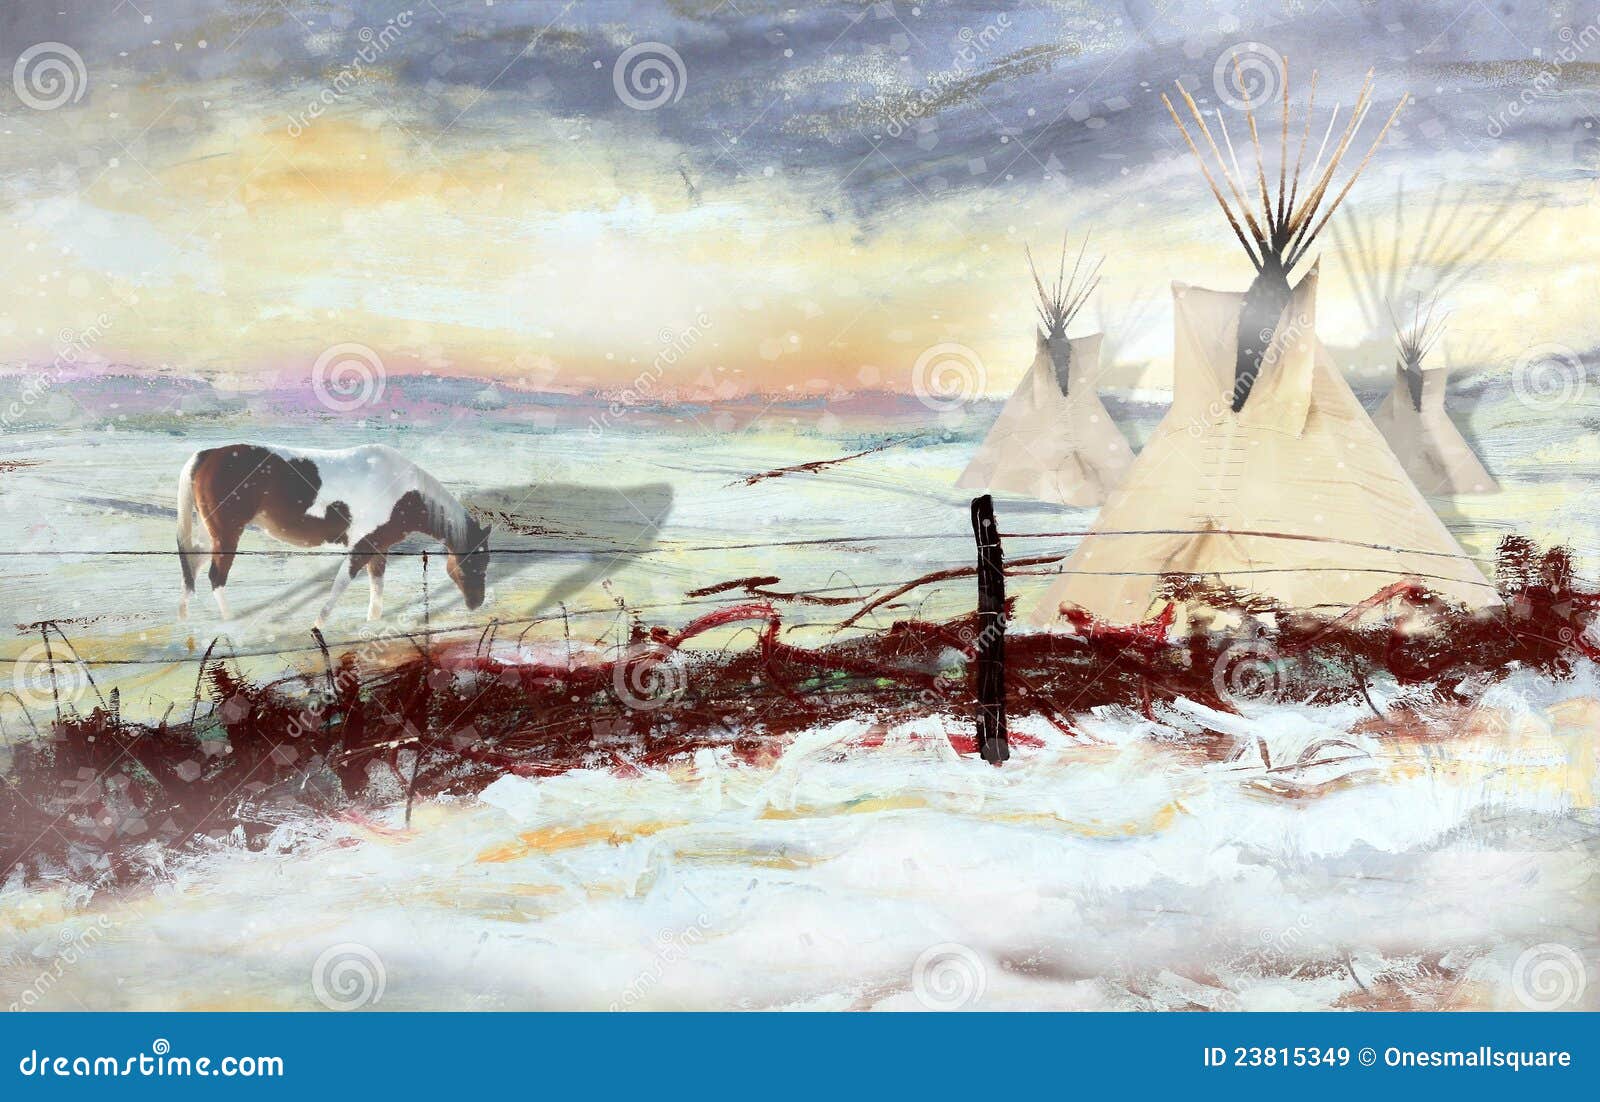 Native American Landscape Illustration of a community of tipi's and a ...